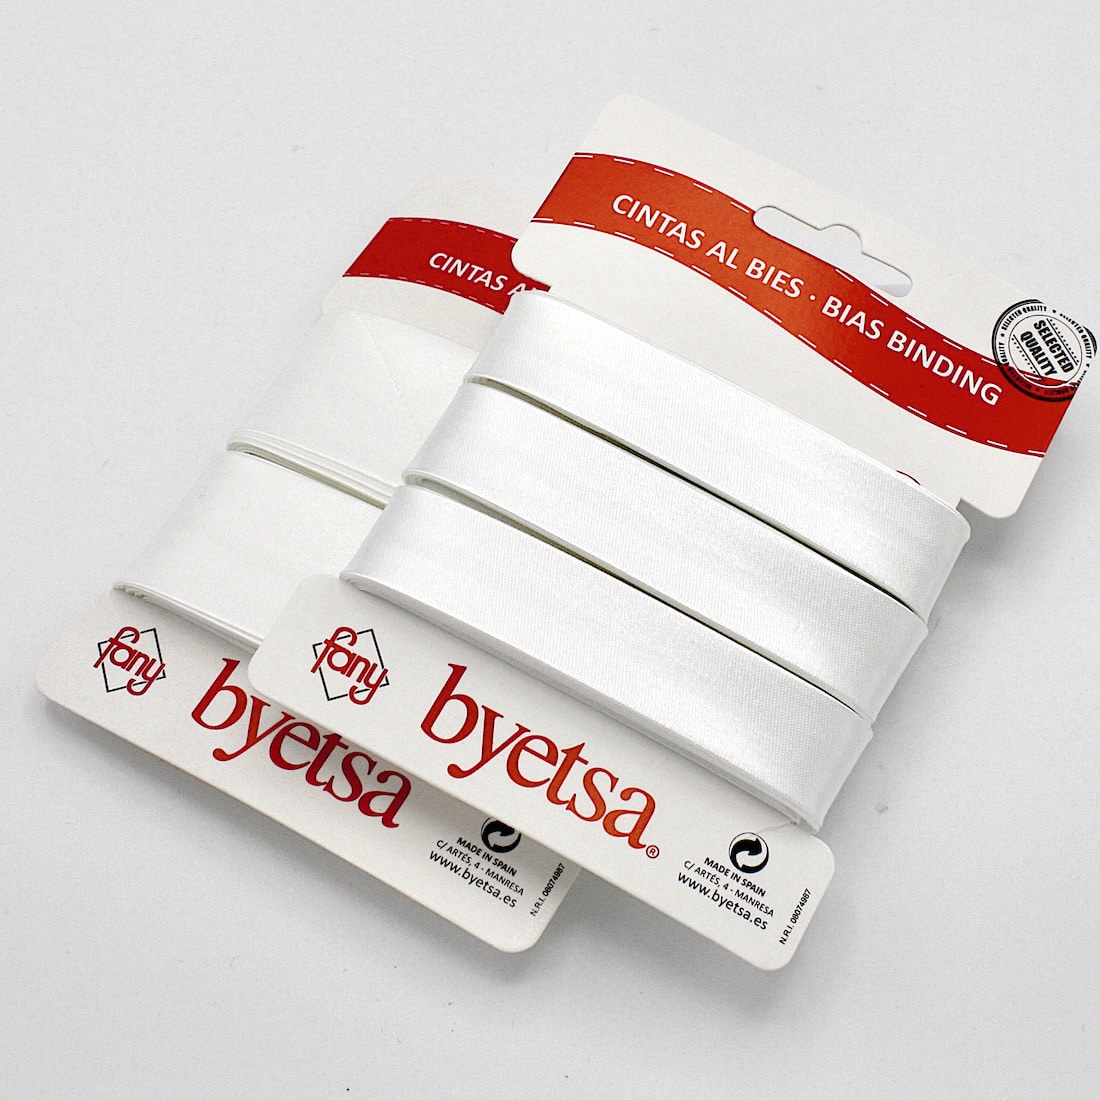 5 metres of Pre-packed Satin Bias Binding Tape in 18mm and 30mm width in Soft White 02